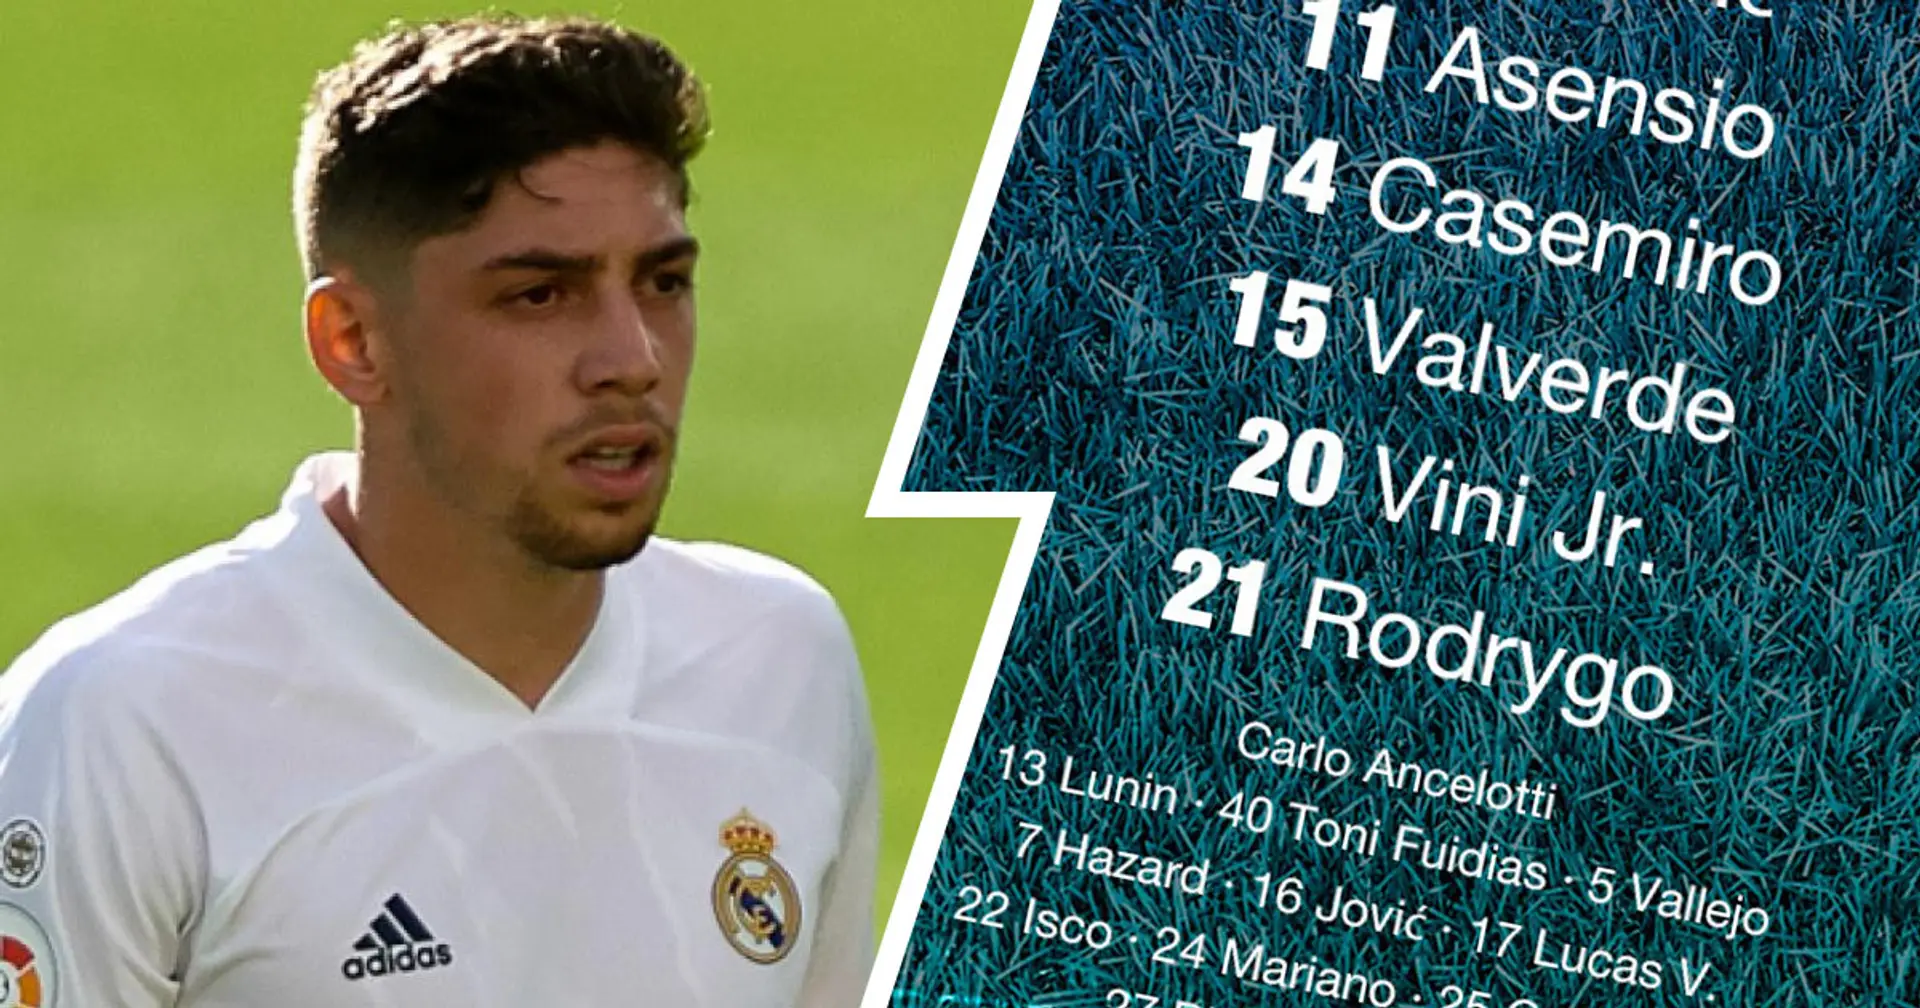 OFFICIAL: Valverde at right-back as Real Madrid XI vs Villarreal unveiled